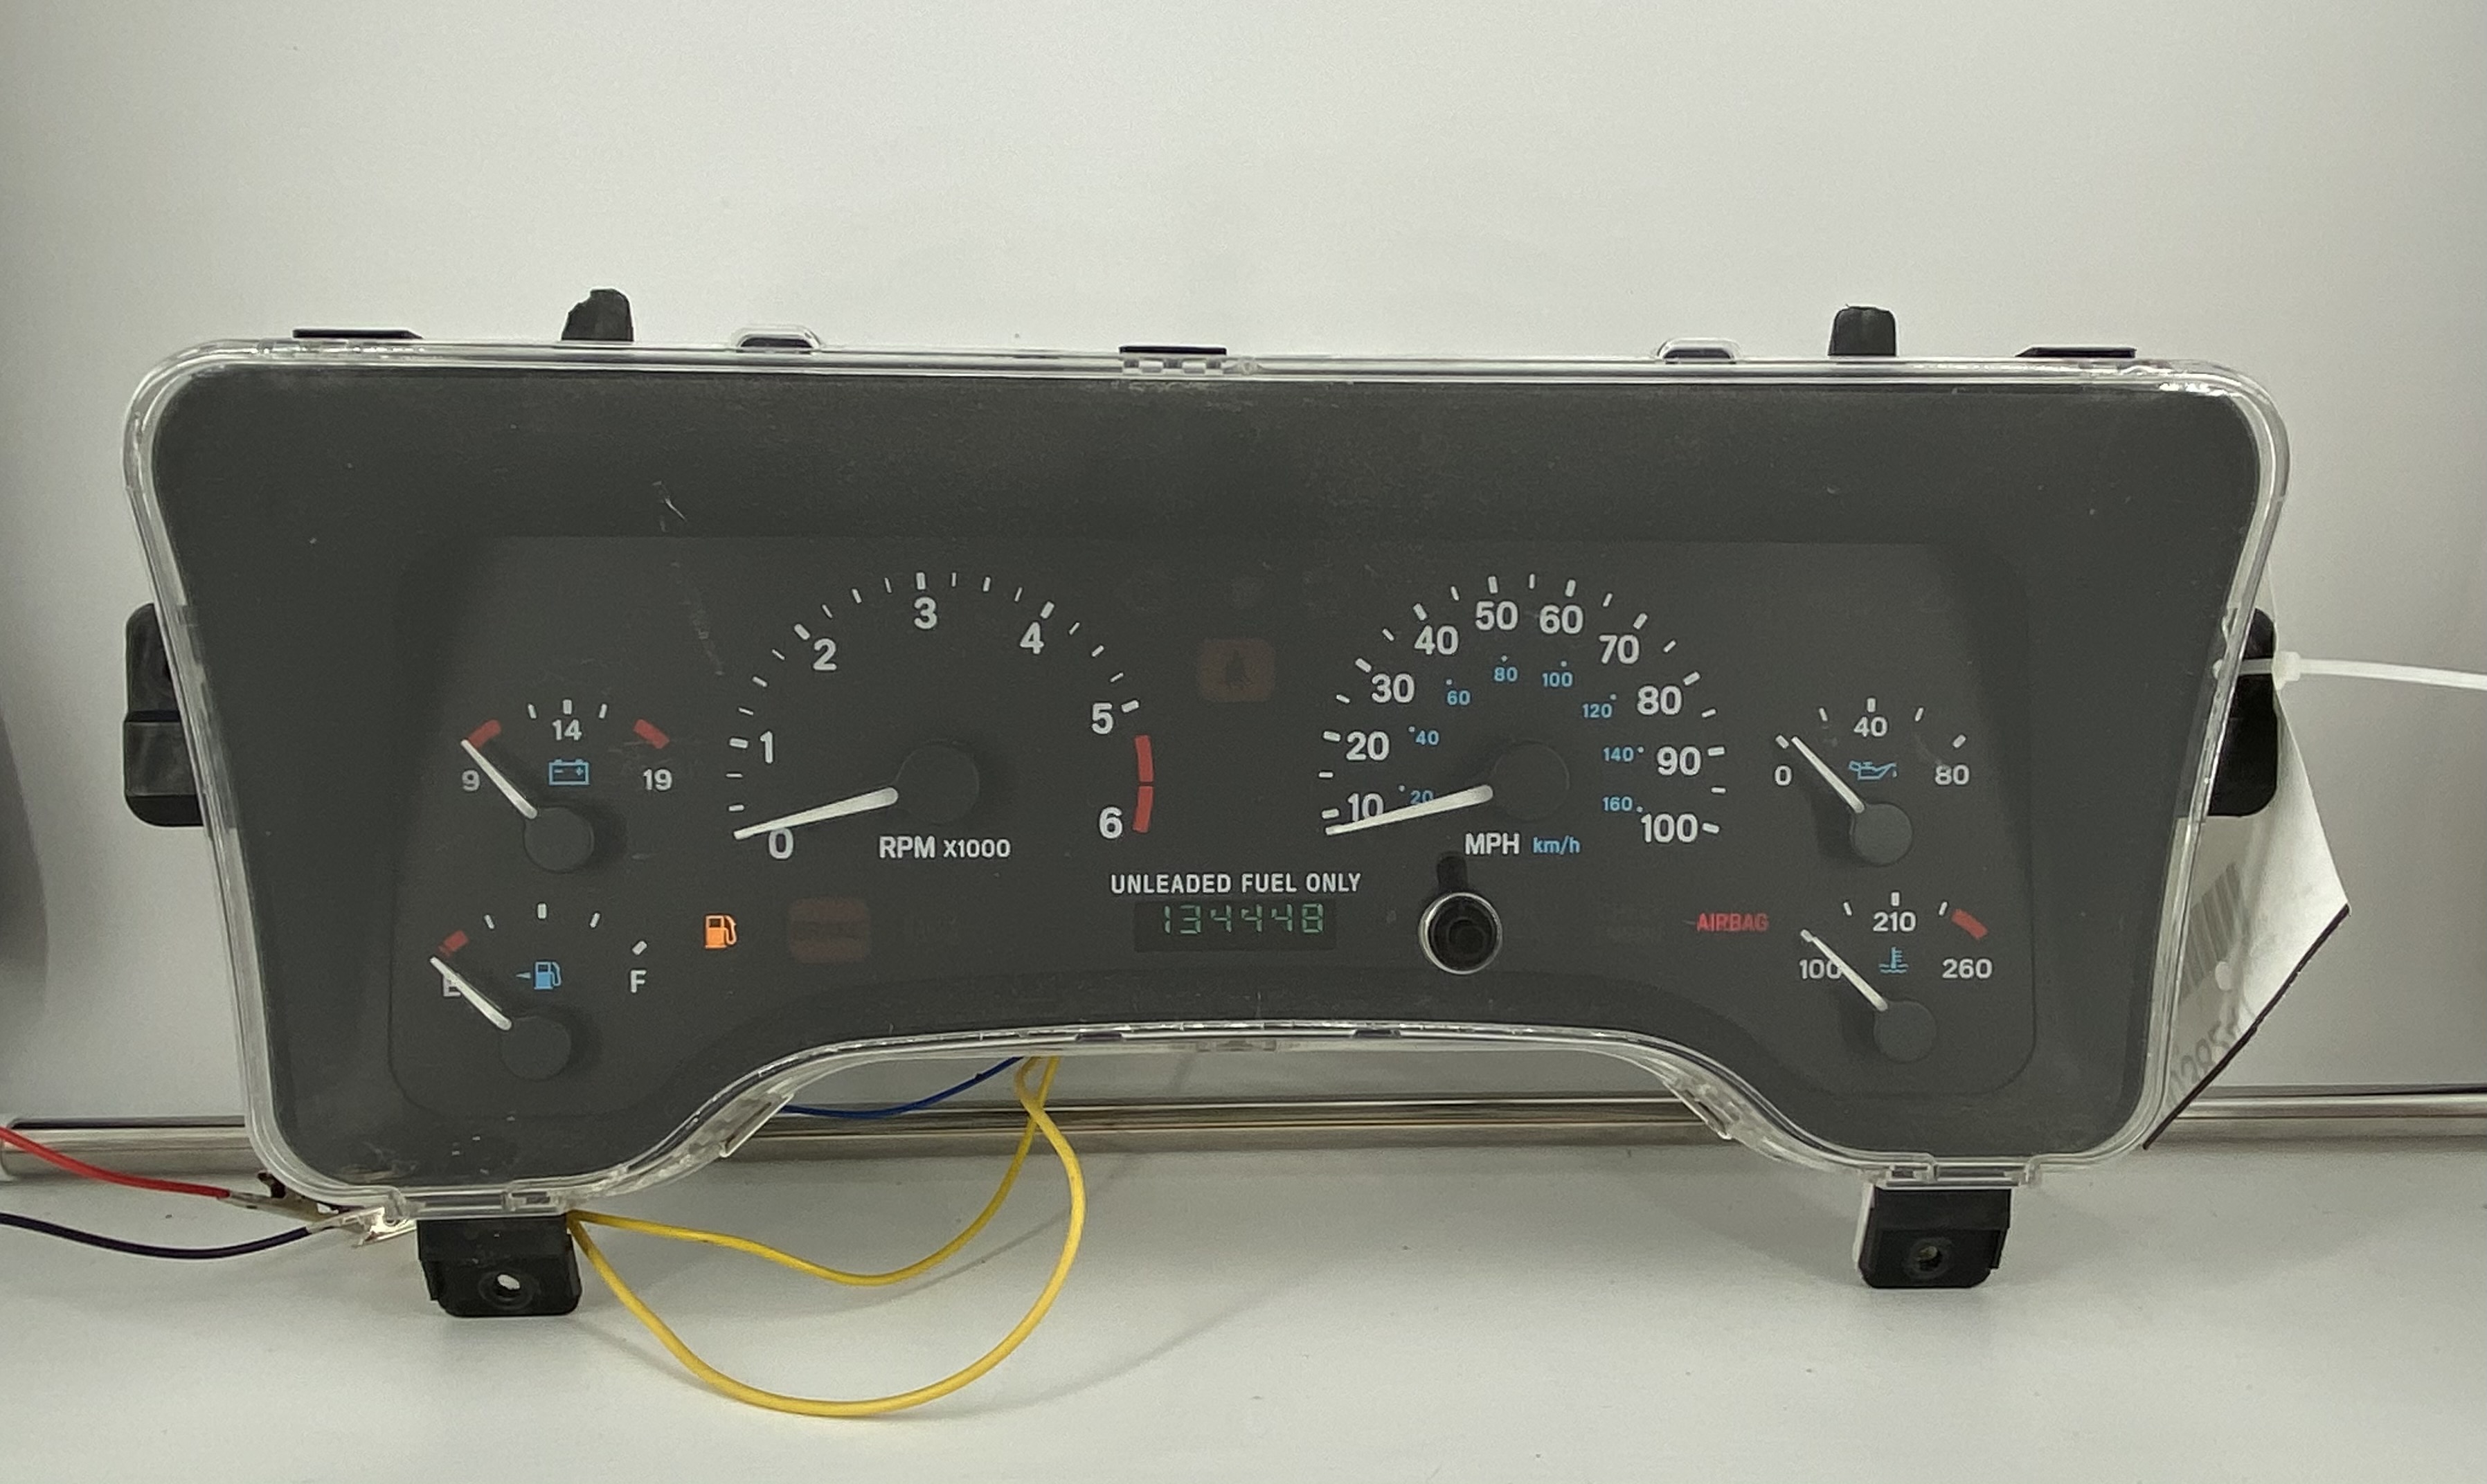 1997 JEEP WRANGLER USED DASHBOARD INSTRUMENT CLUSTER FOR SALE (MPH) -  DASHBOARD INSTRUMENT CLUSTER